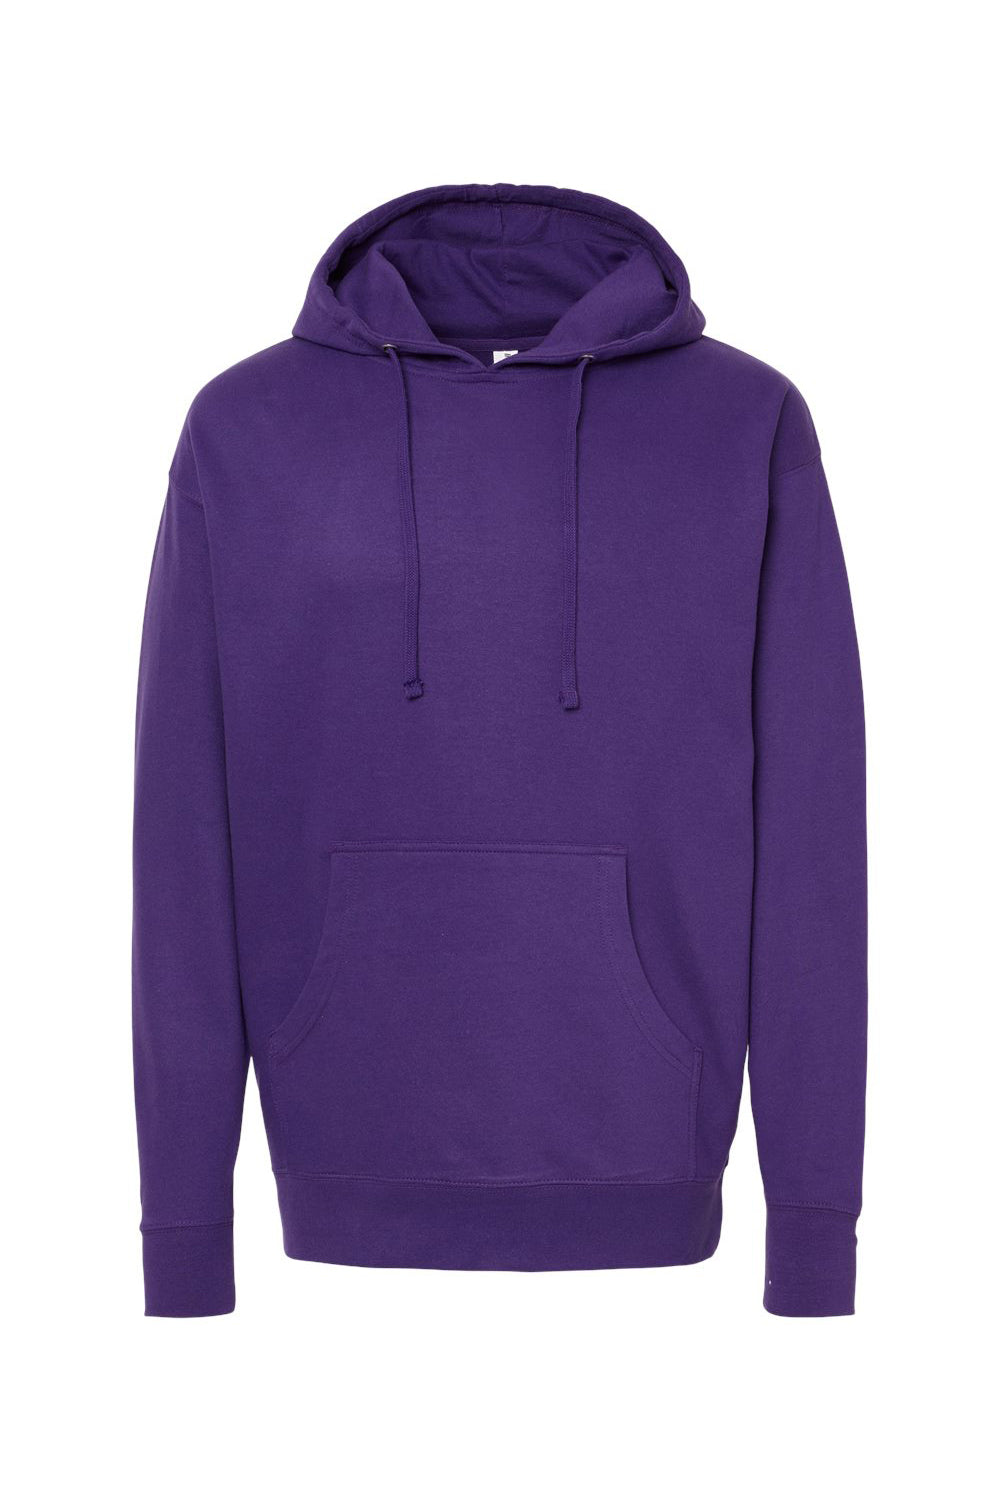 Independent Trading Co. SS4500 Mens Hooded Sweatshirt Hoodie Purple Flat Front